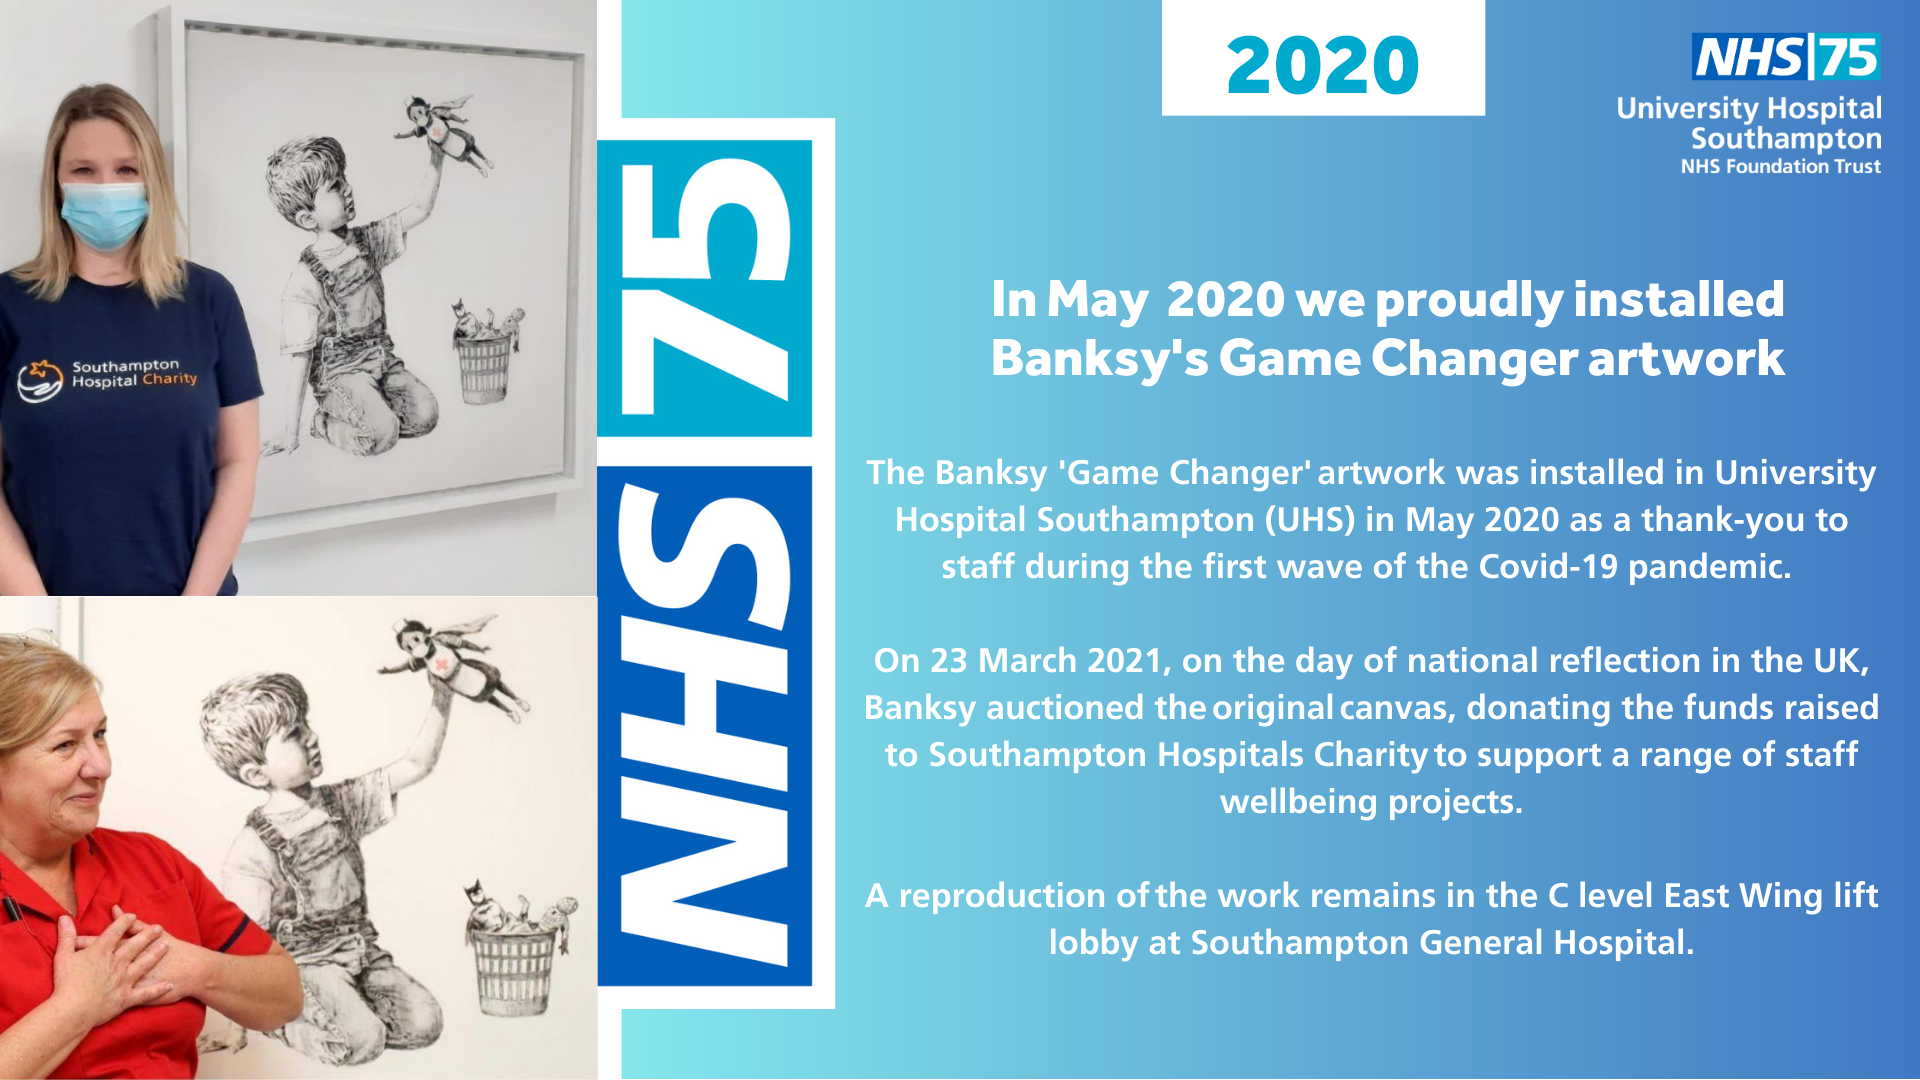 In May 2020 we proudly installed Banksy's Game Changer artwork